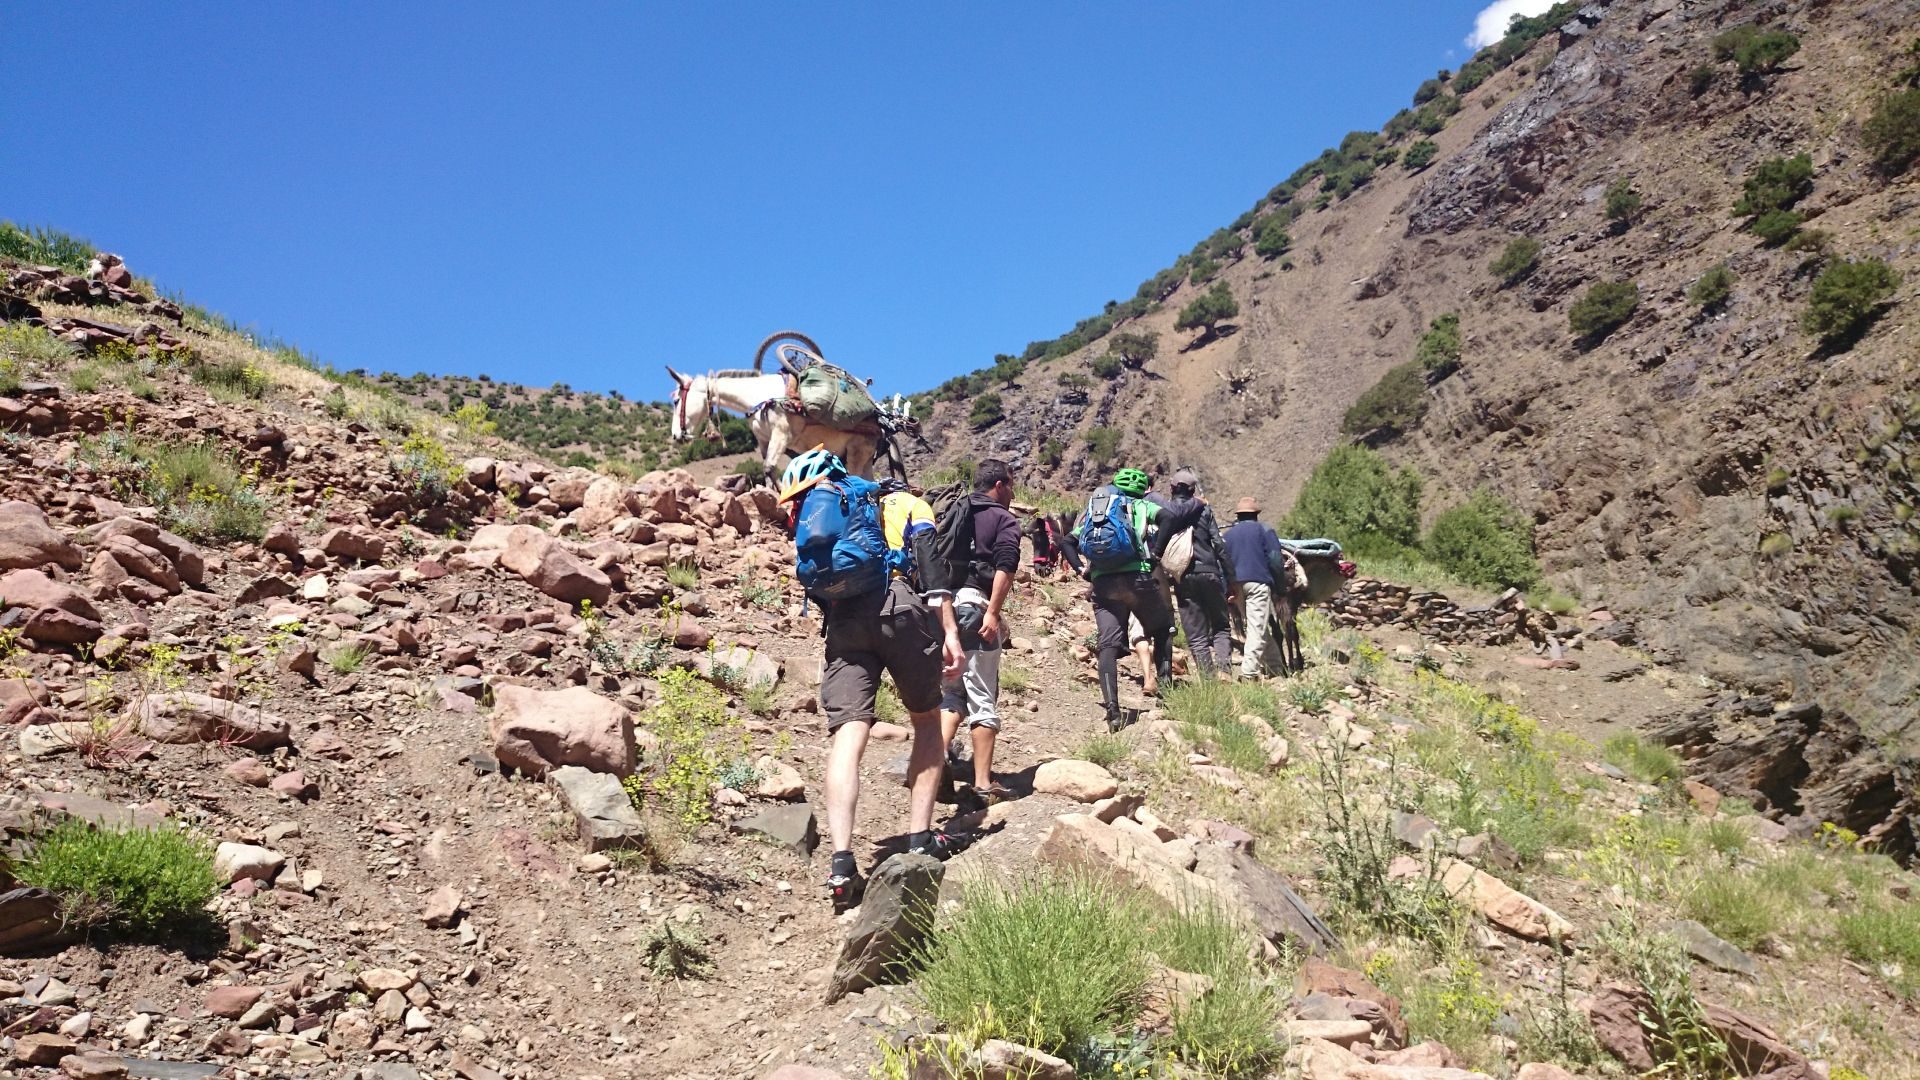 Day 4 - Those  mules sure do carry those bikes better than we could! The climb toward Tizi-n-Rughuelt pass. © Shaun Grey